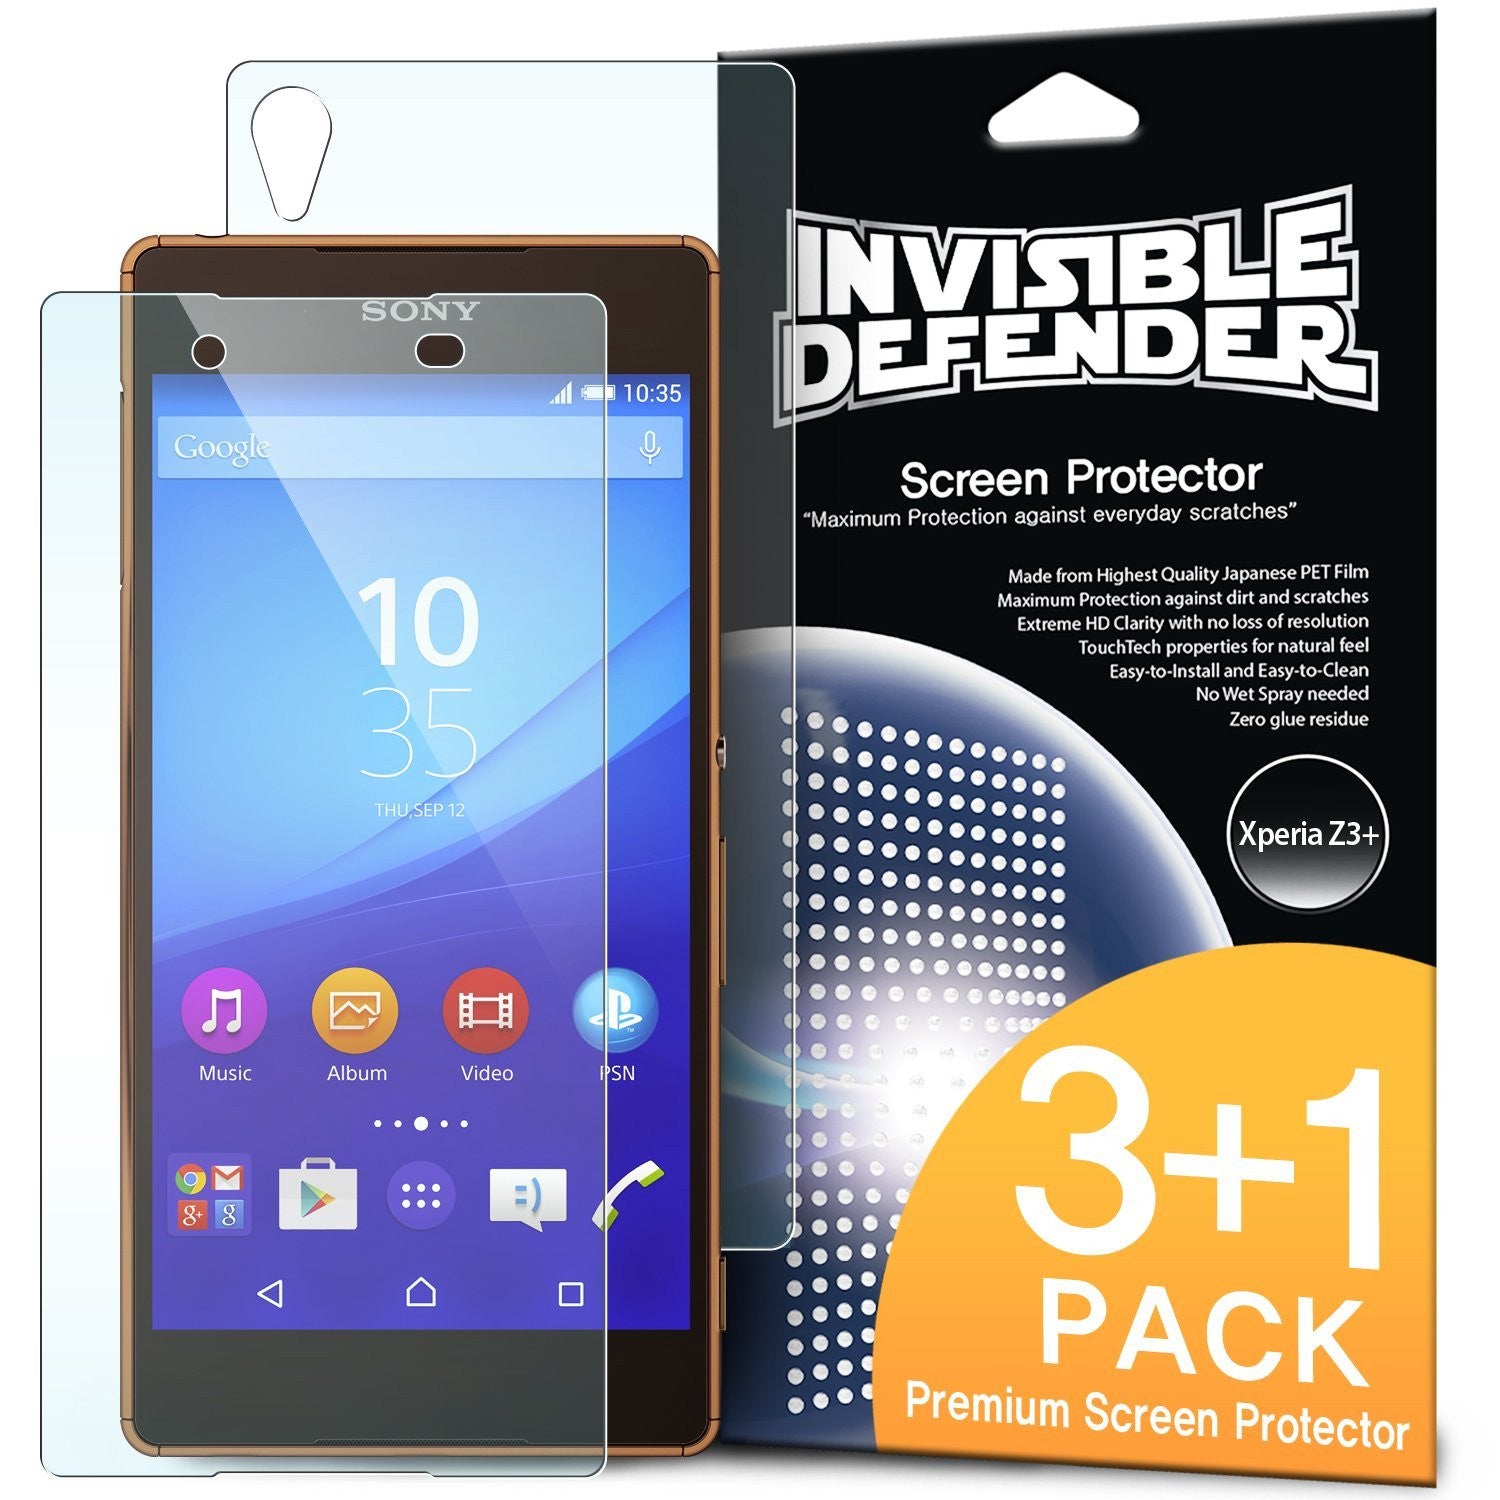 xperia z3+, ringke invisible defender 3+1 pack screen protector